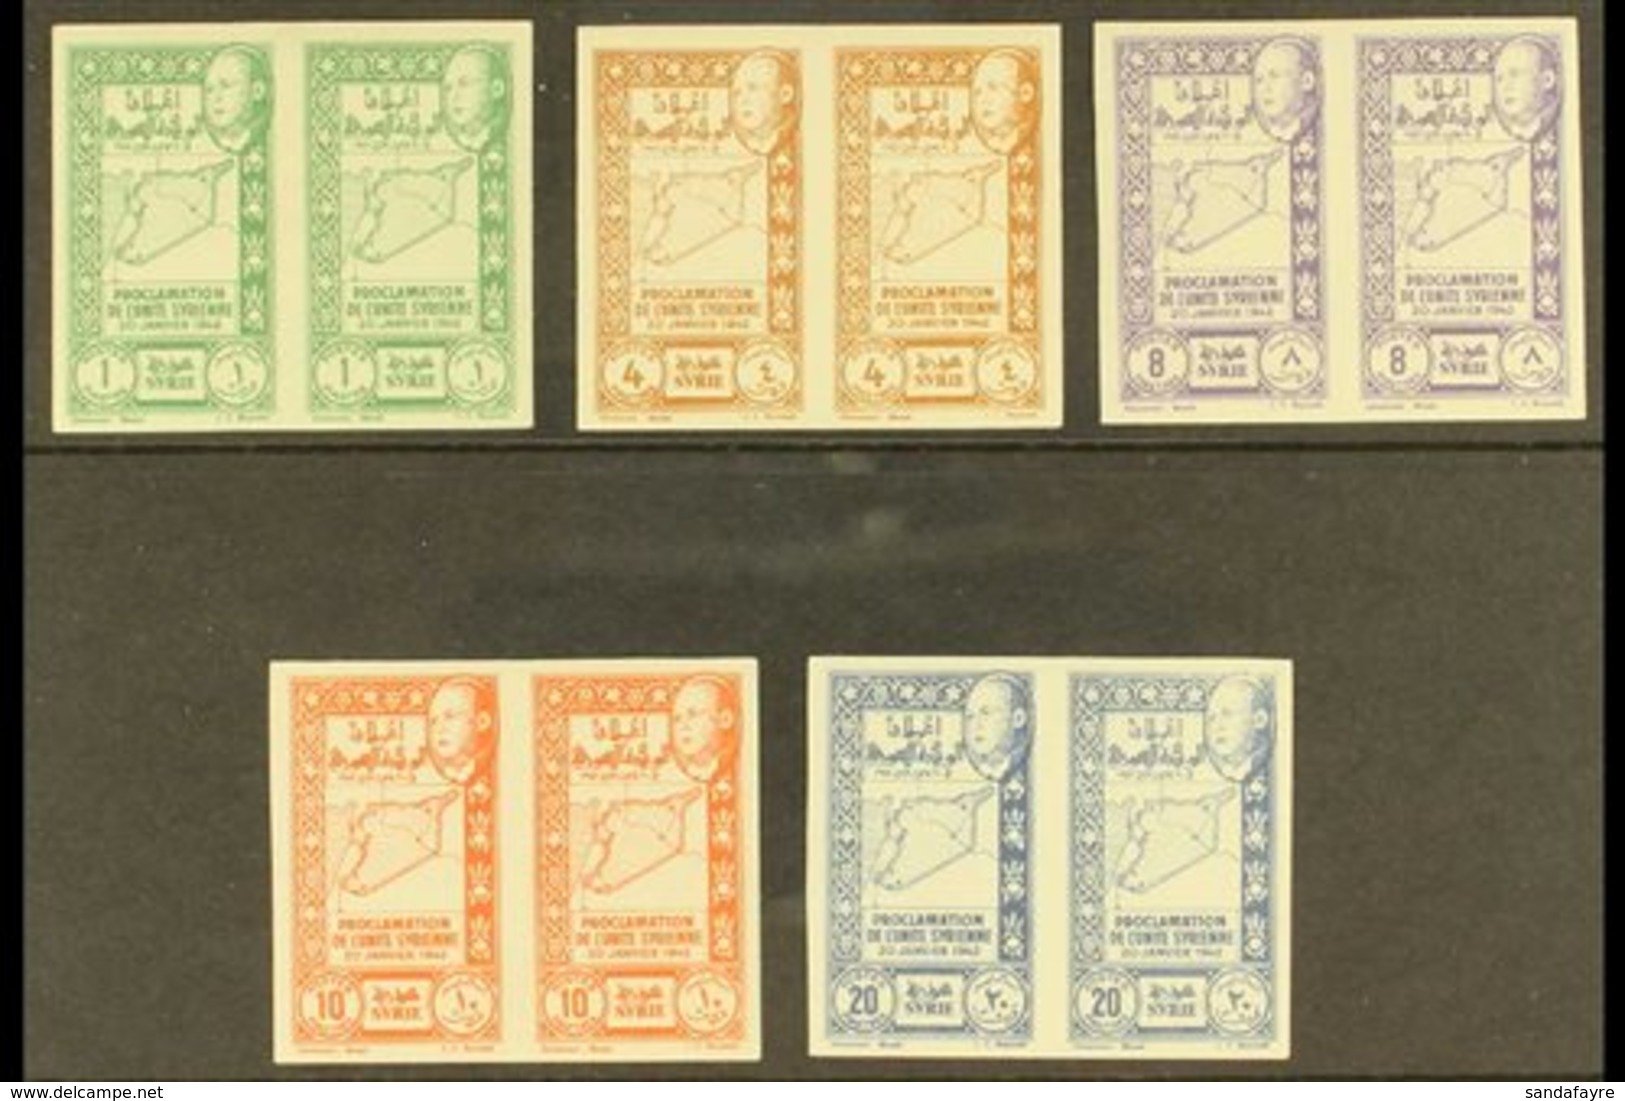 1943 Union Of Latakia & Jebel Druze With Syria - The Complete Postage Set (Maury 283/87, SG 367/71) In IMPERF PAIRS, Nev - Syria